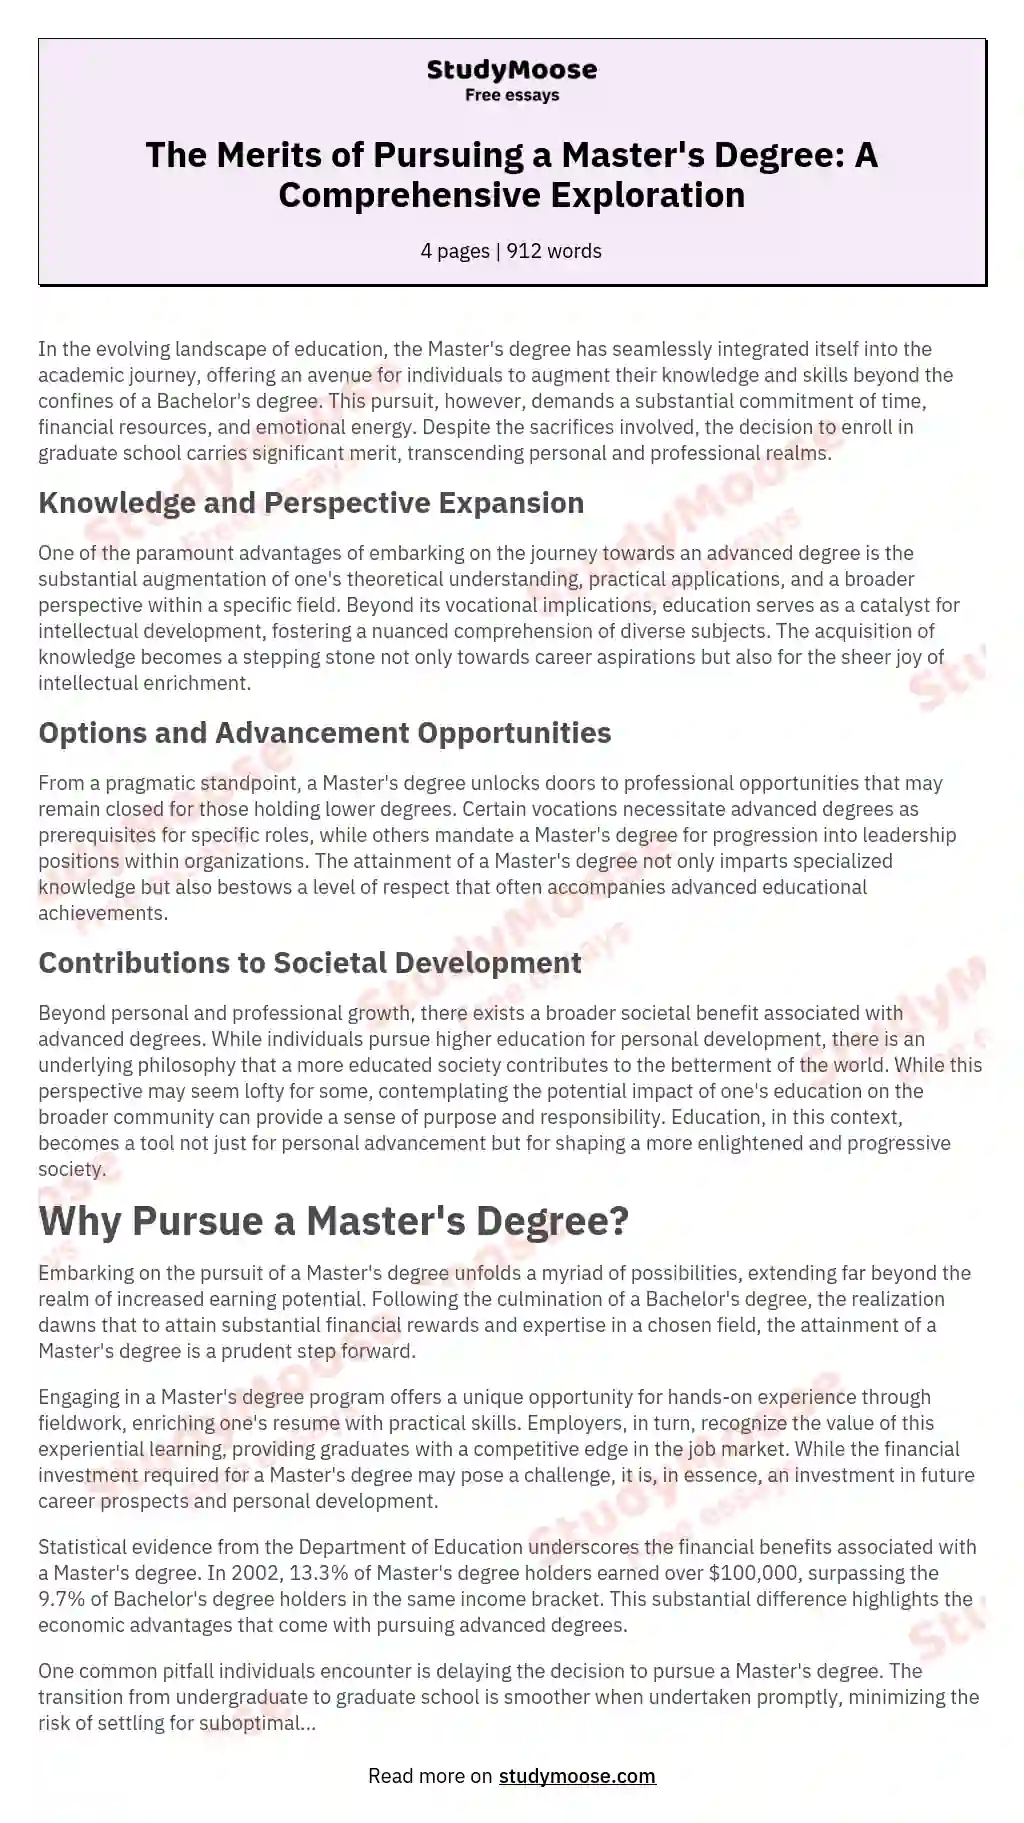 The Merits of Pursuing a Master's Degree: A Comprehensive Exploration essay